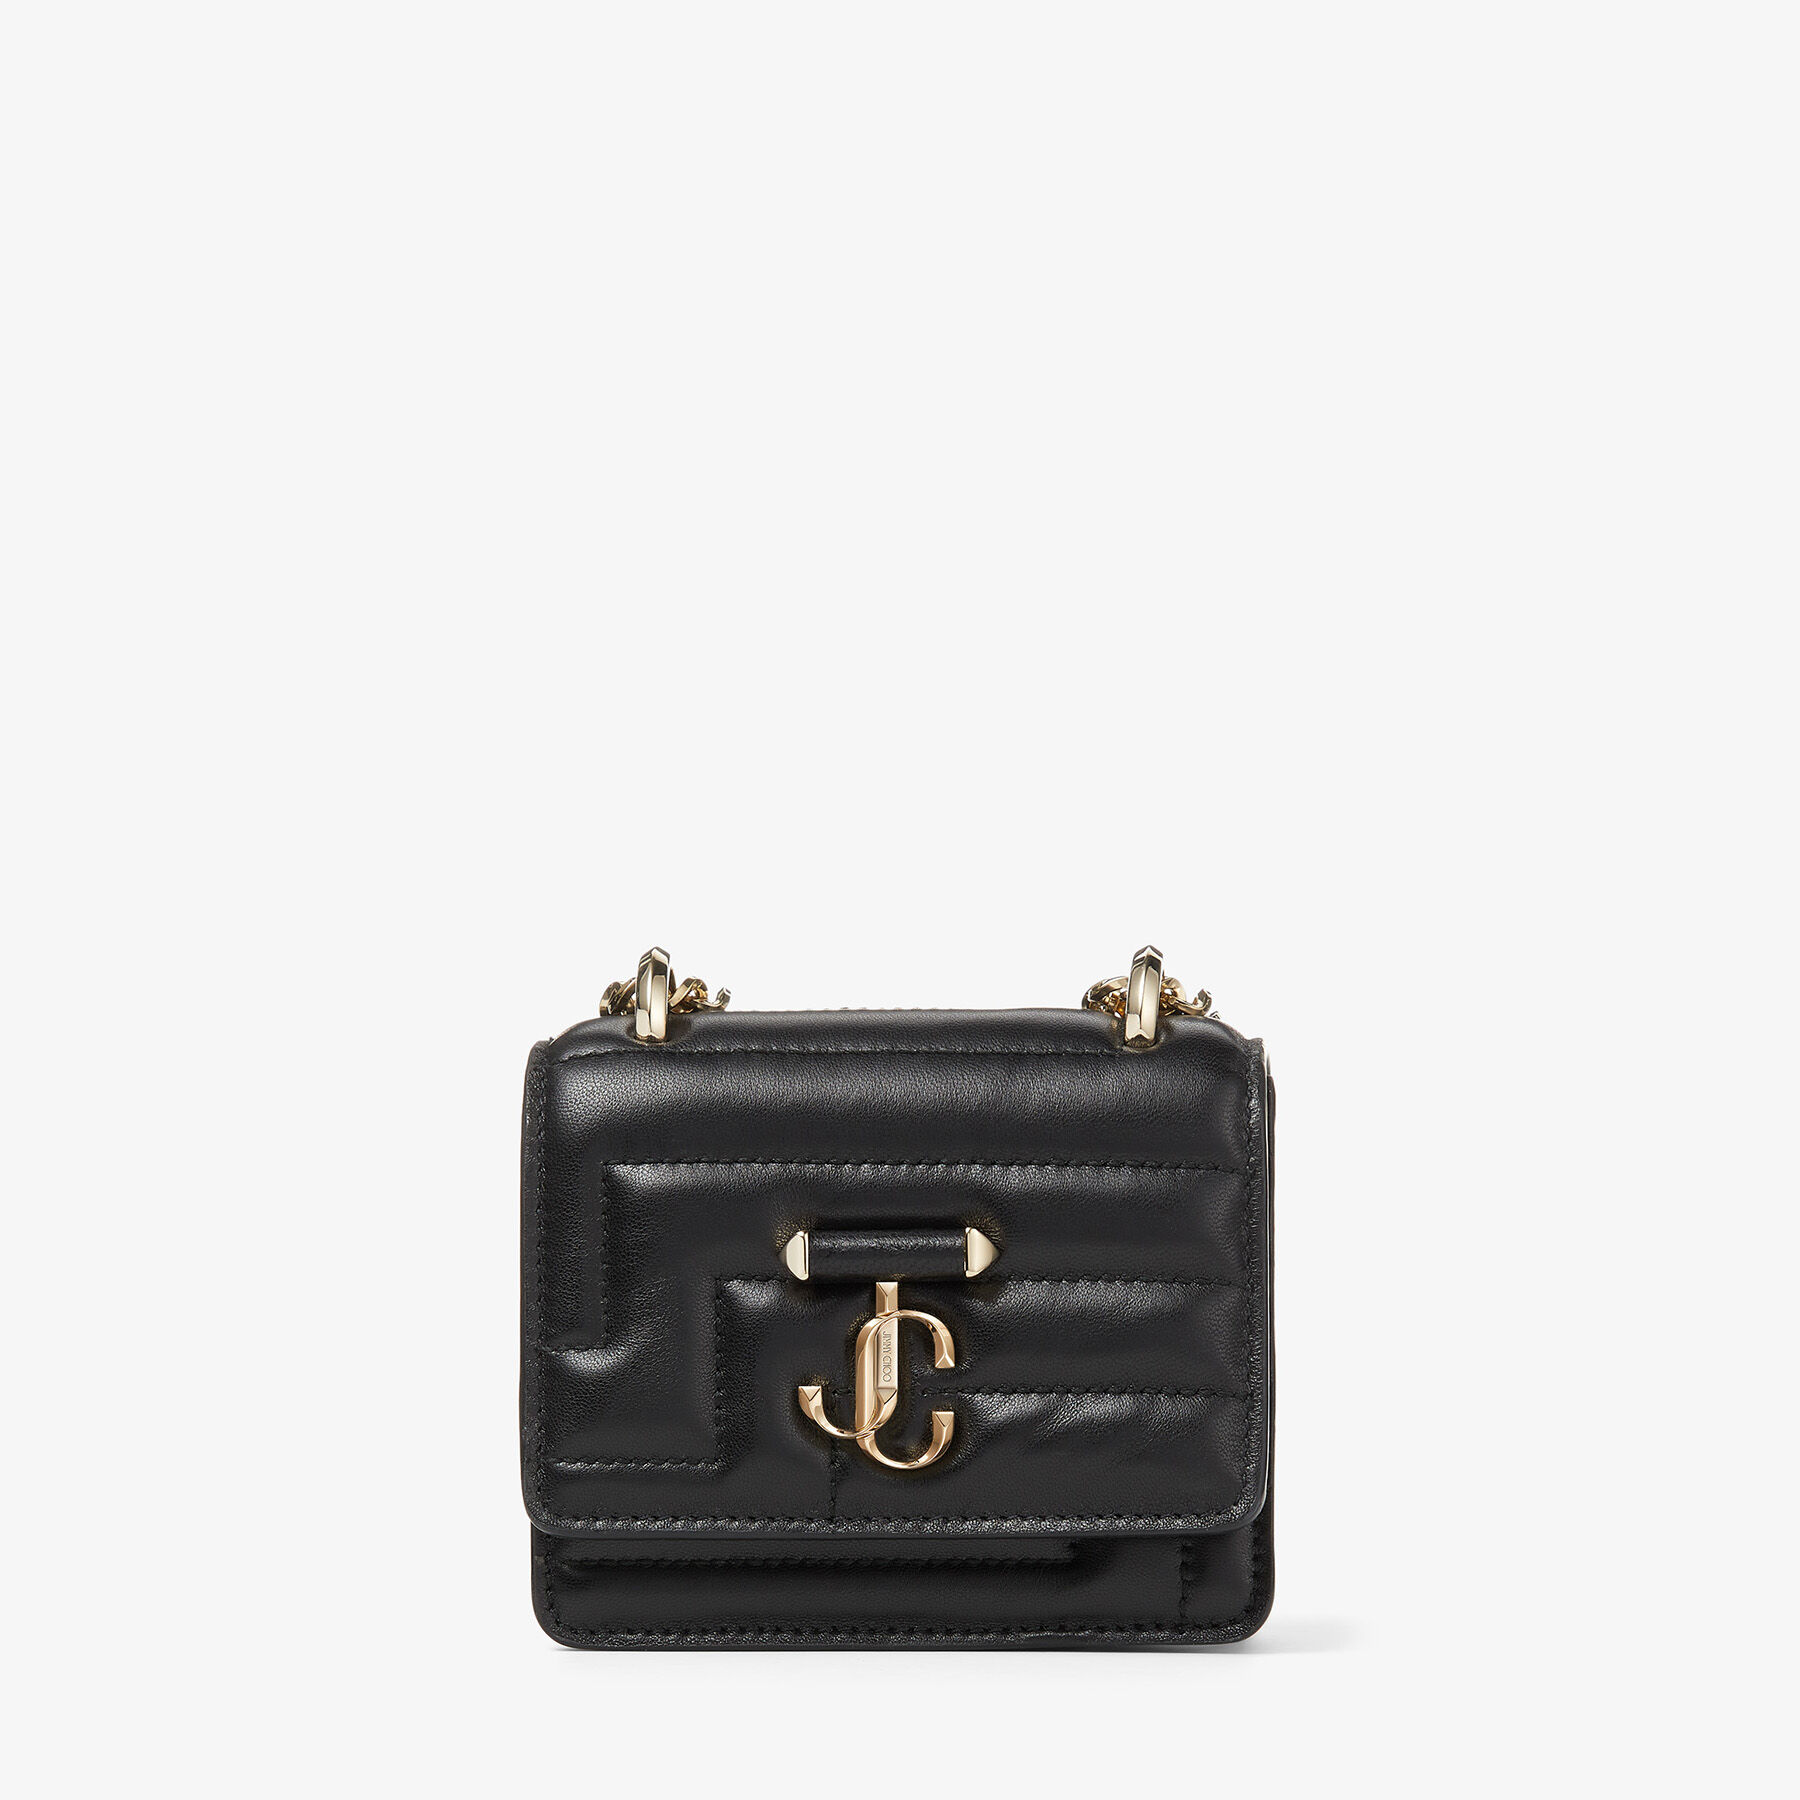 The Macro Trend of Chanel Micro Bags in 2023